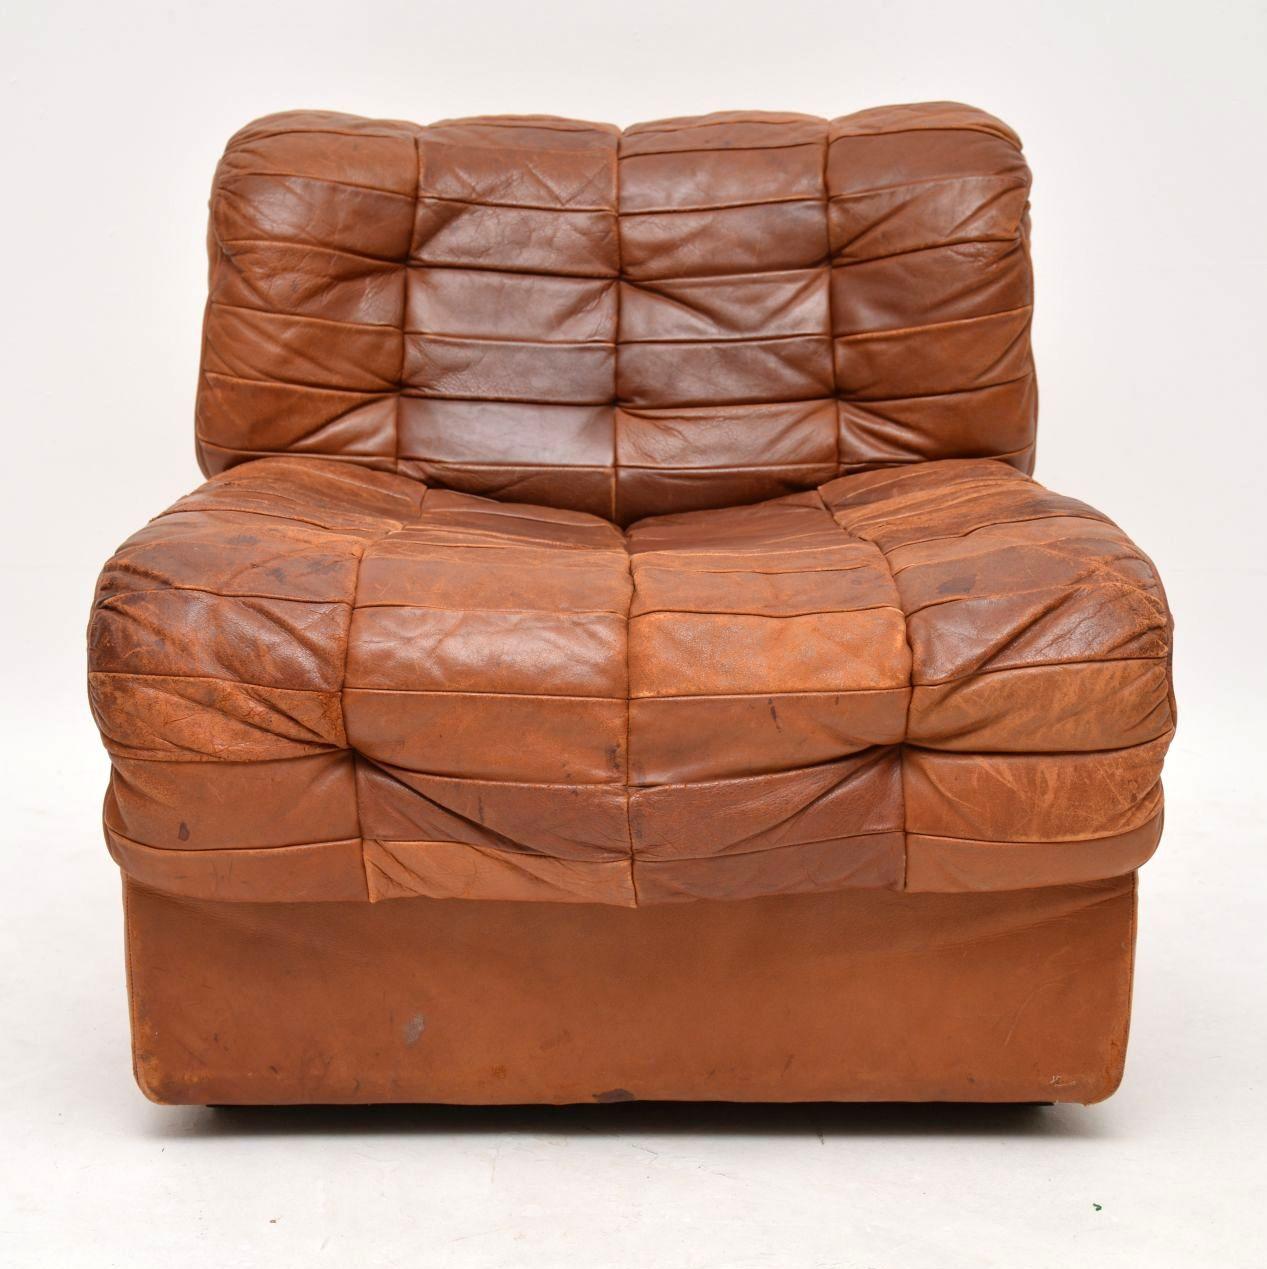 A lovely vintage modular unit in leather by De Sede, made in Switzerland and dating from the 1960-1970s. This would originally have been part of a large modular sofa; we obtained this piece as a single which is quite unusual, and also unusual is the